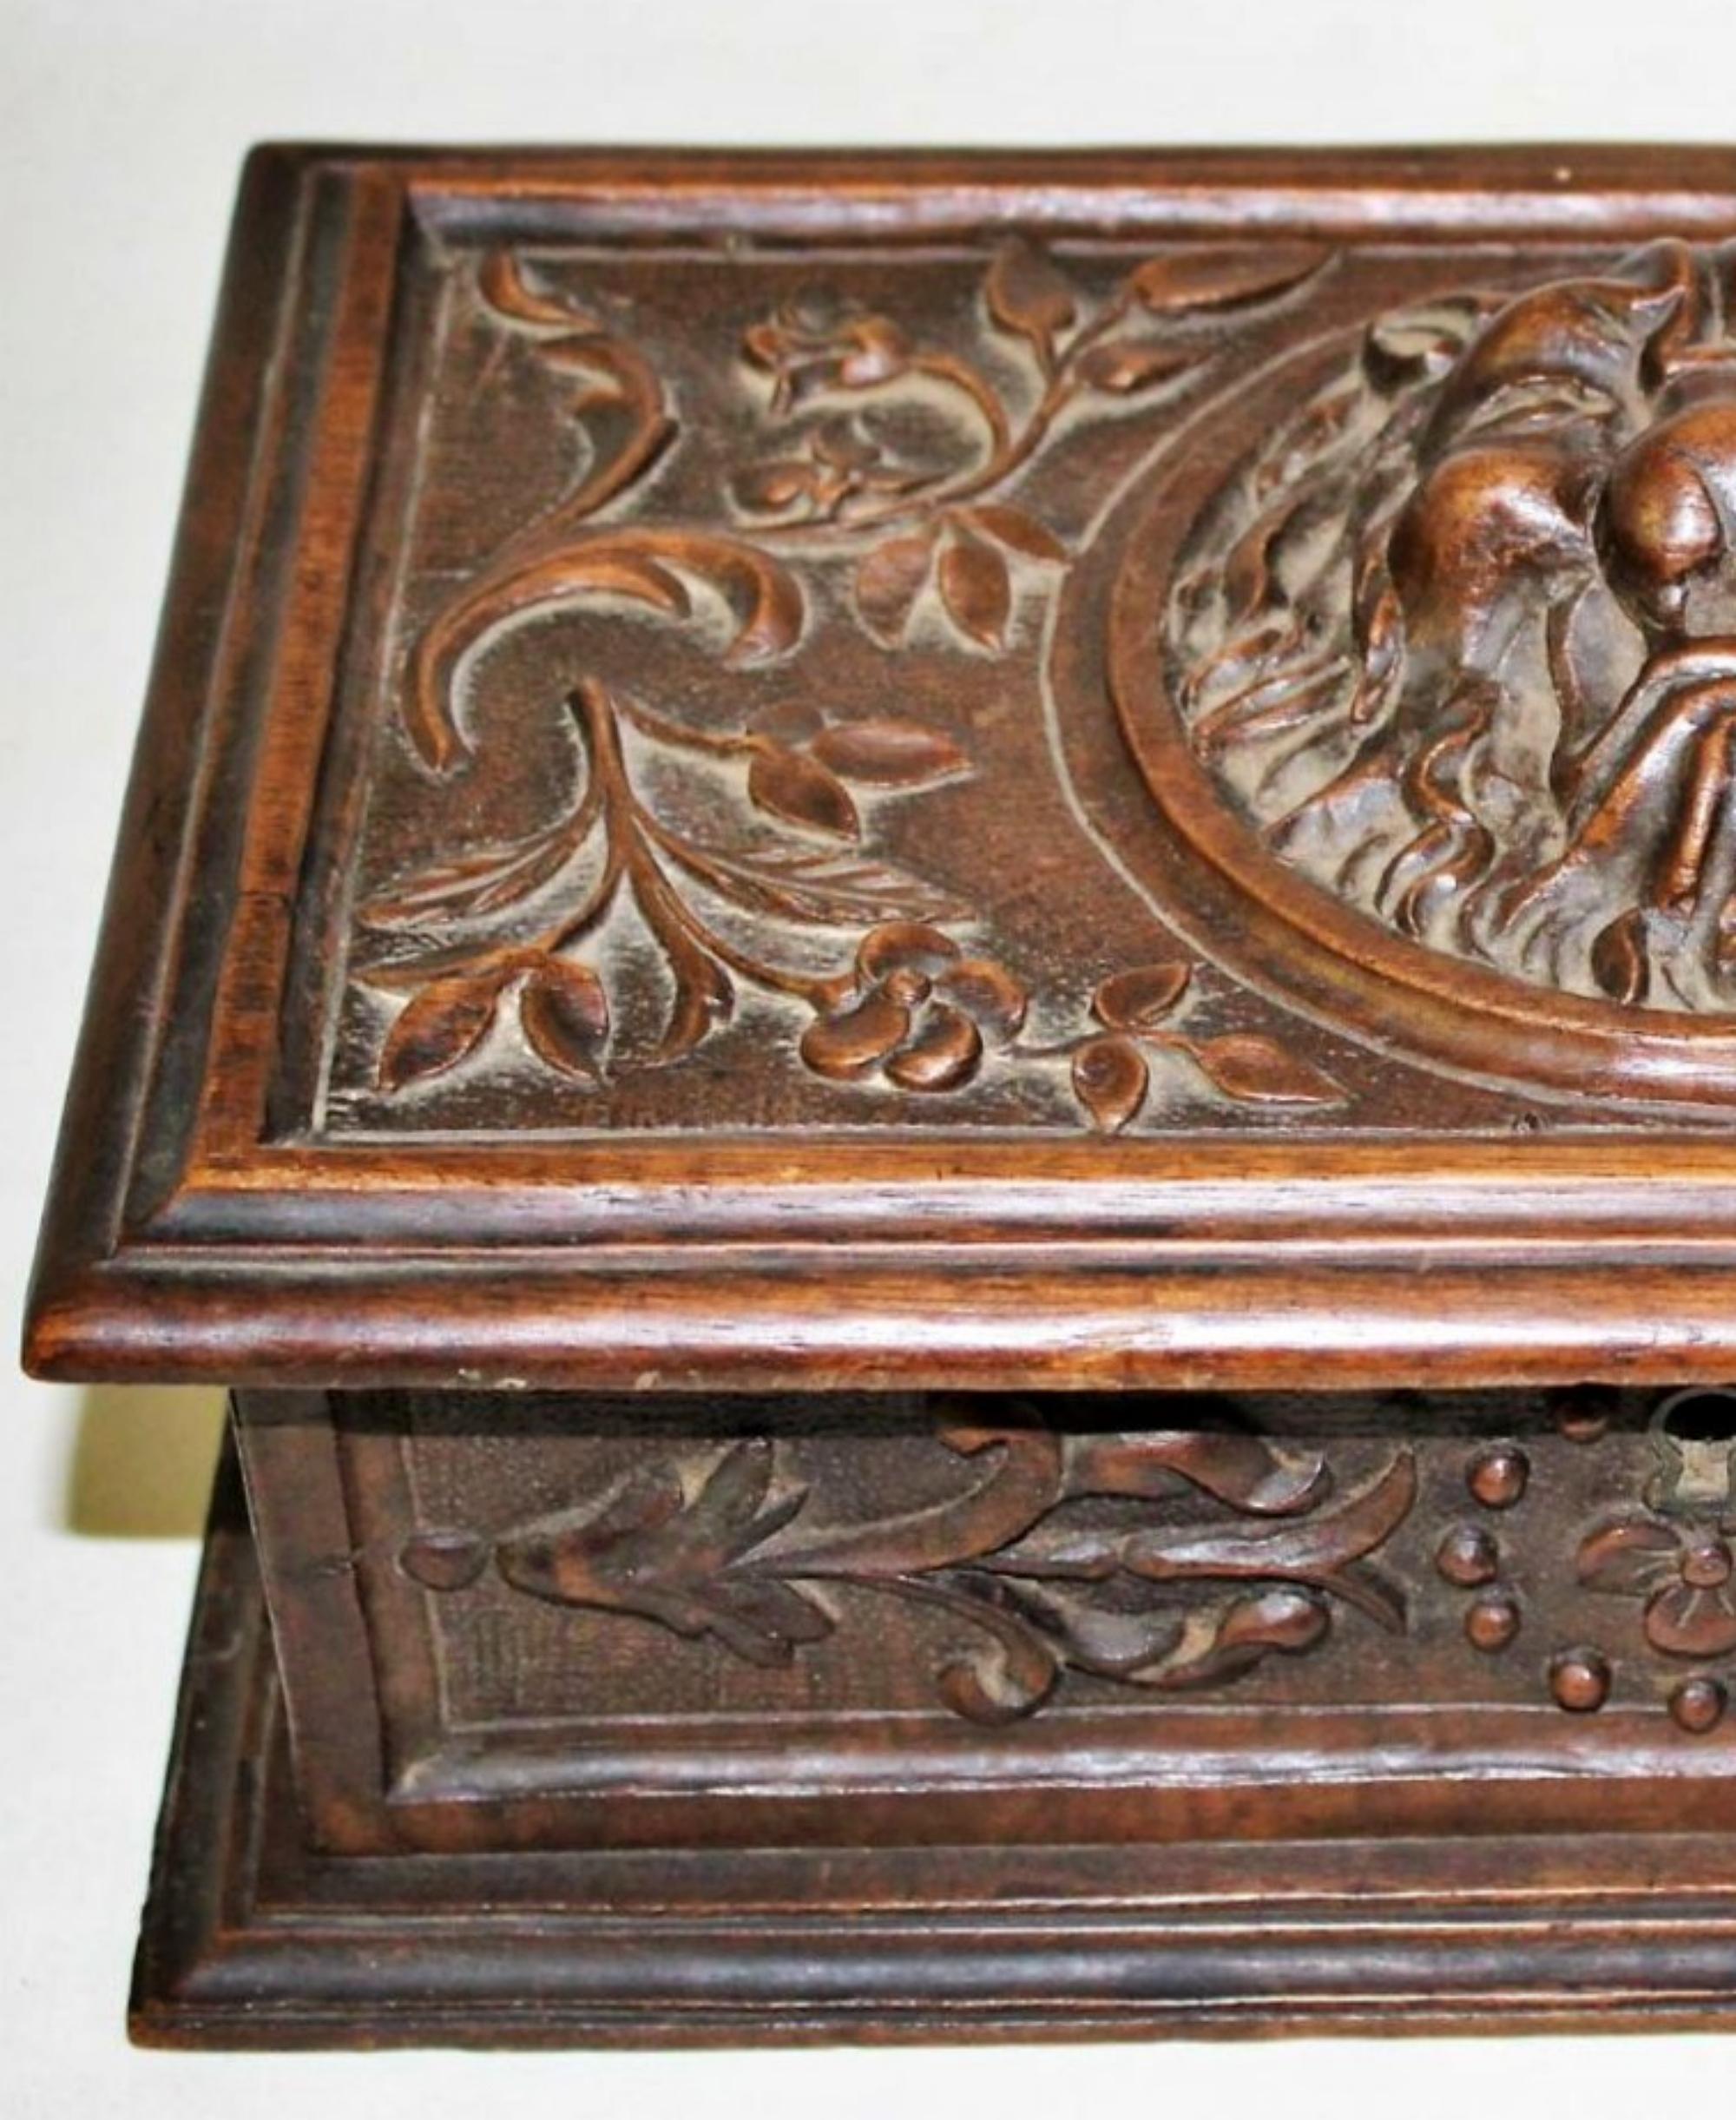 Italian Box in High Relief Carved Oak Wood 18th Century
on the top lid a lion's head in relief. 
Dim. 14x30x18 cm
very good condition

